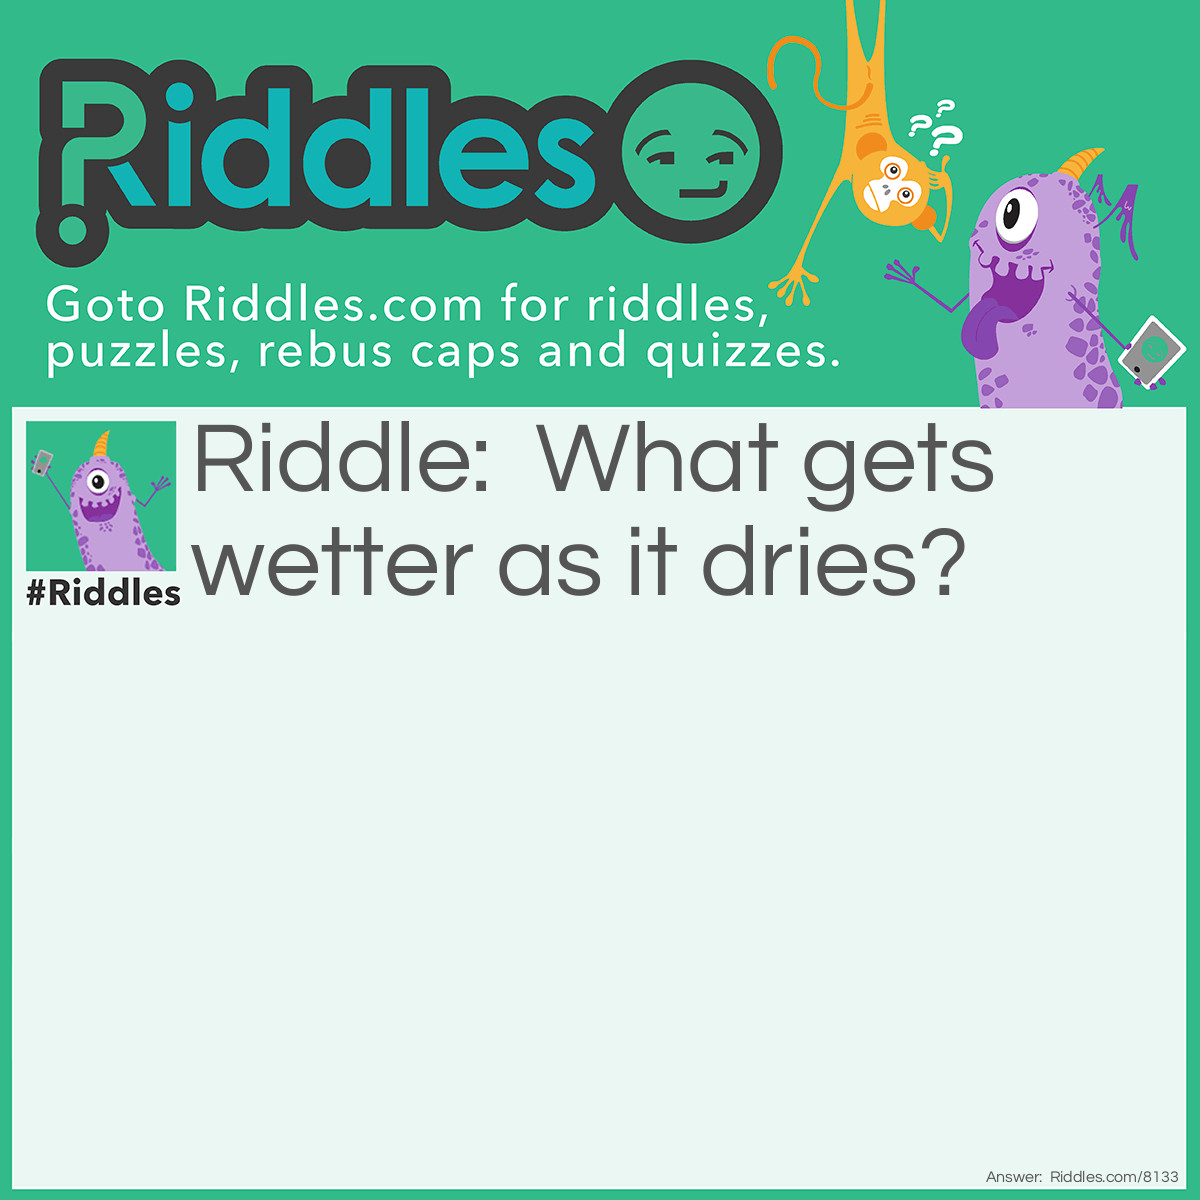 Riddle: What gets wetter as it dries? Answer: A towel